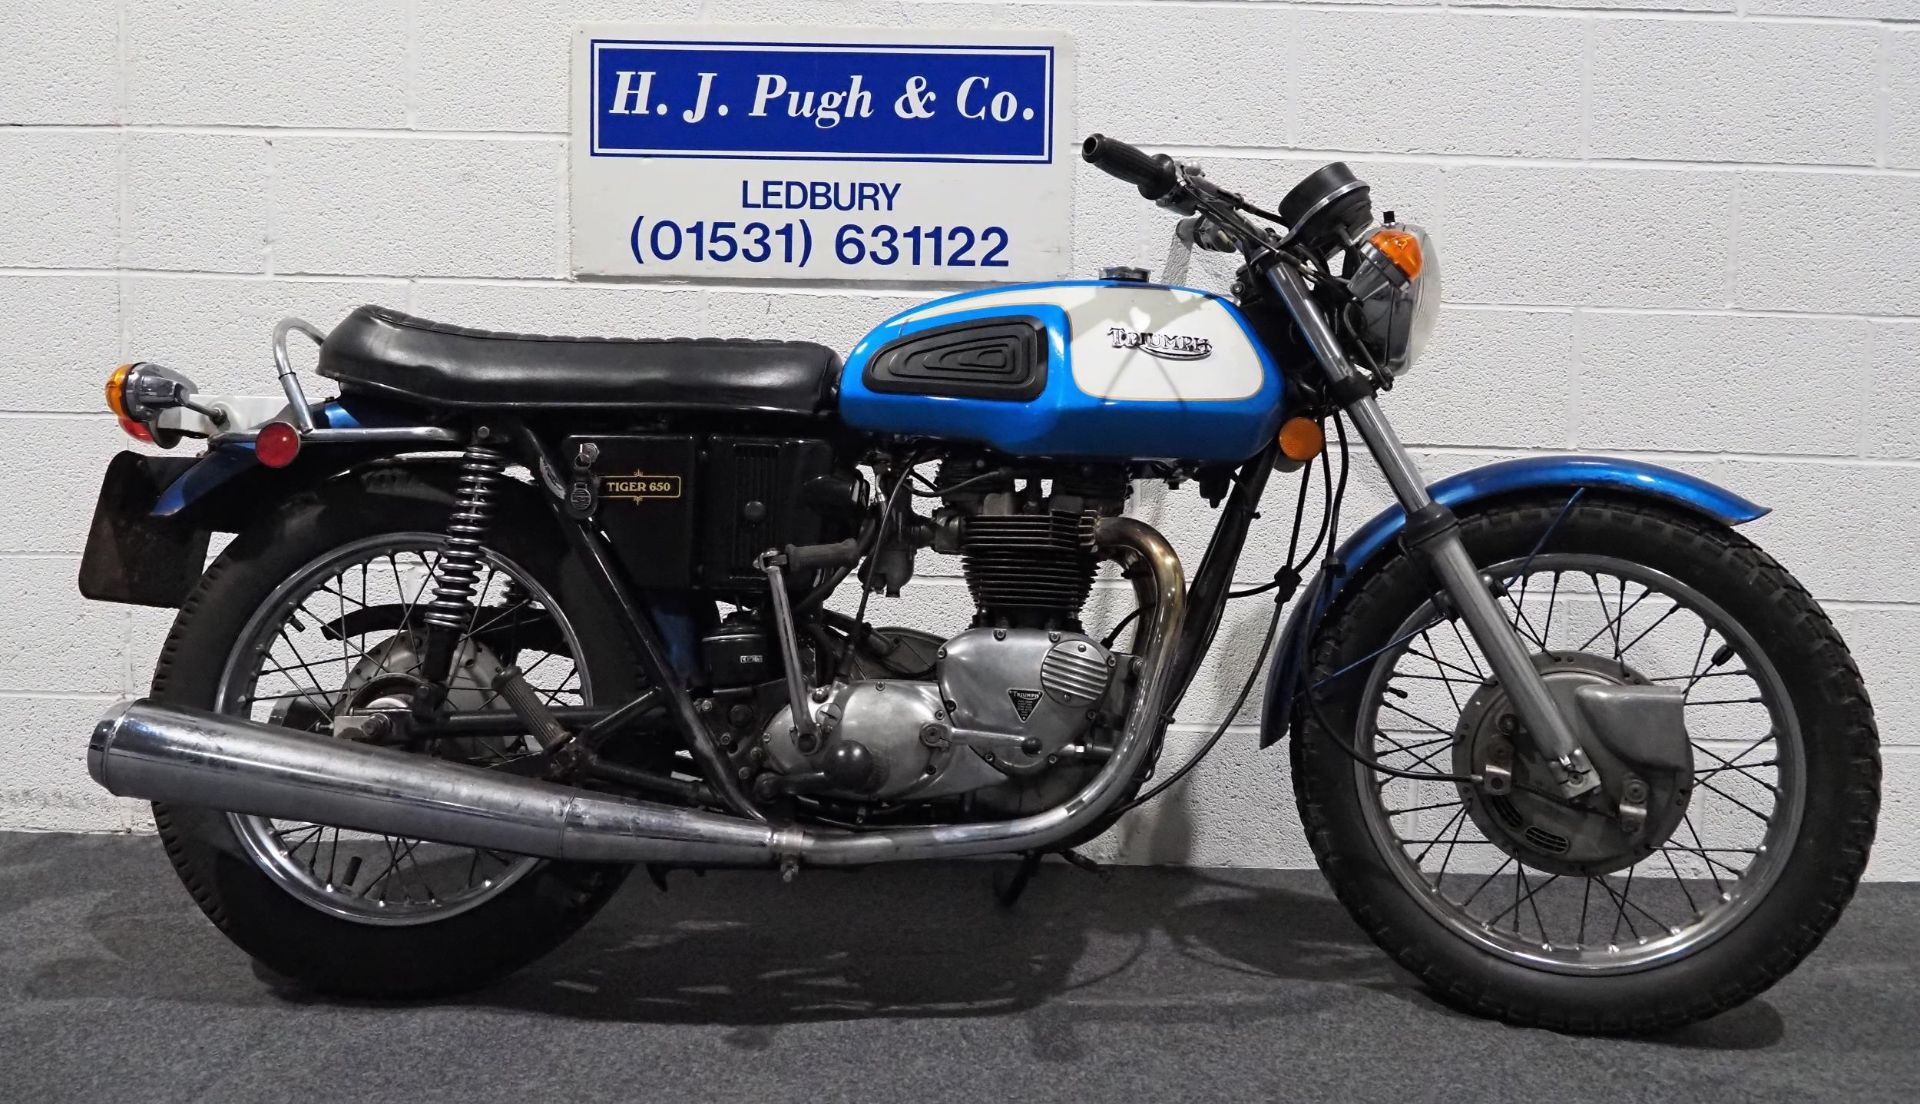 Triumph TR6 Trophy motorcycle, 1973, 649cc. Engine no. AG46499 Frame no. AG46499 Runs and rides, has